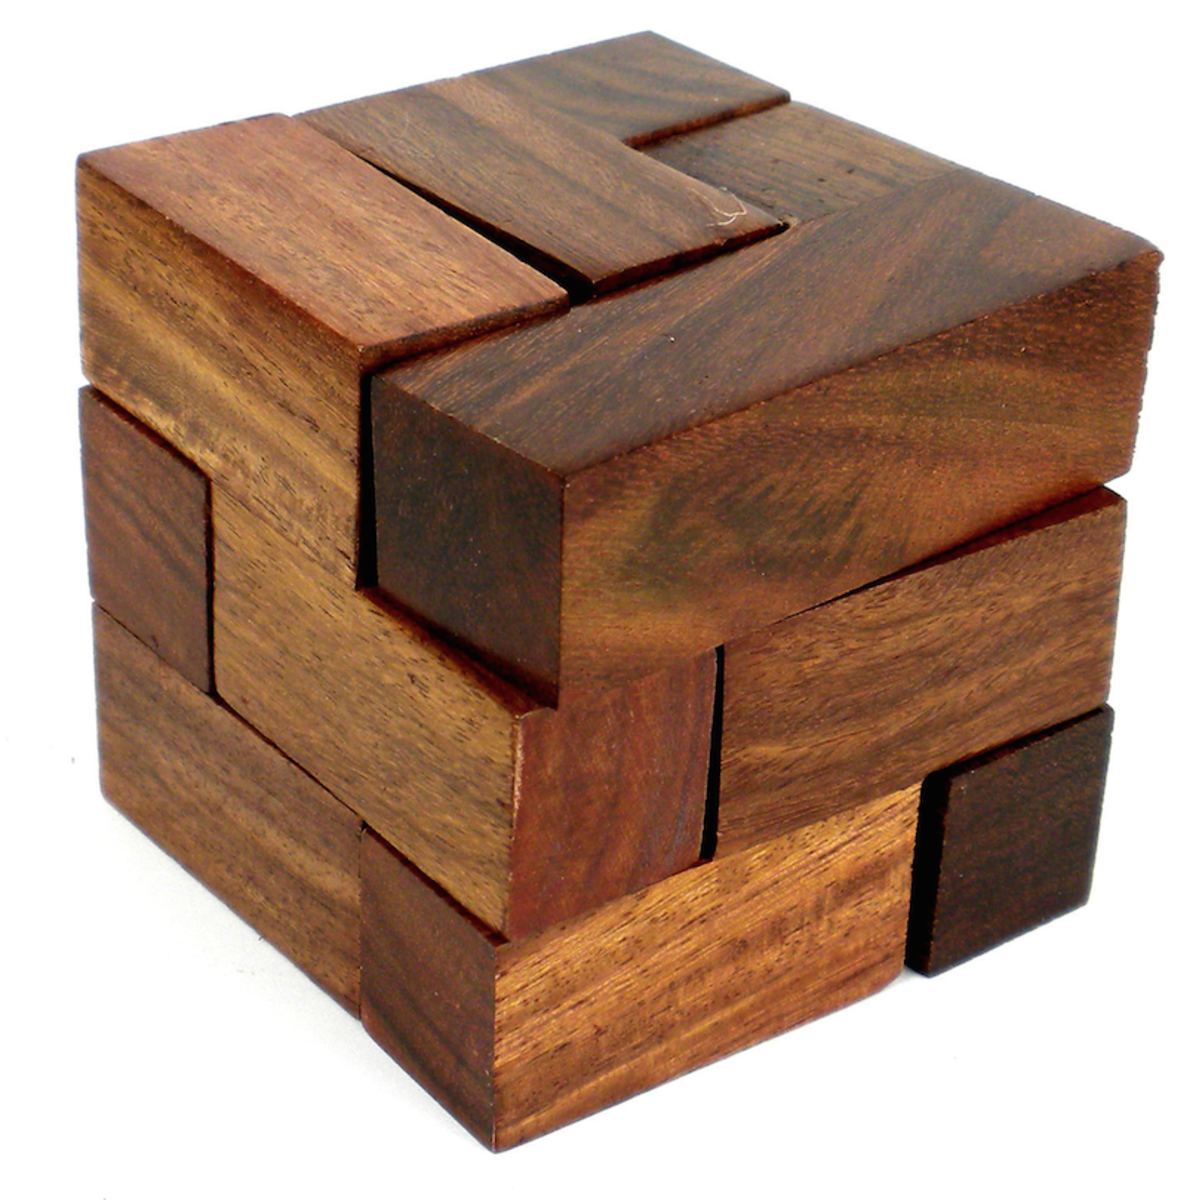 Handmade Wooden Cube Puzzle